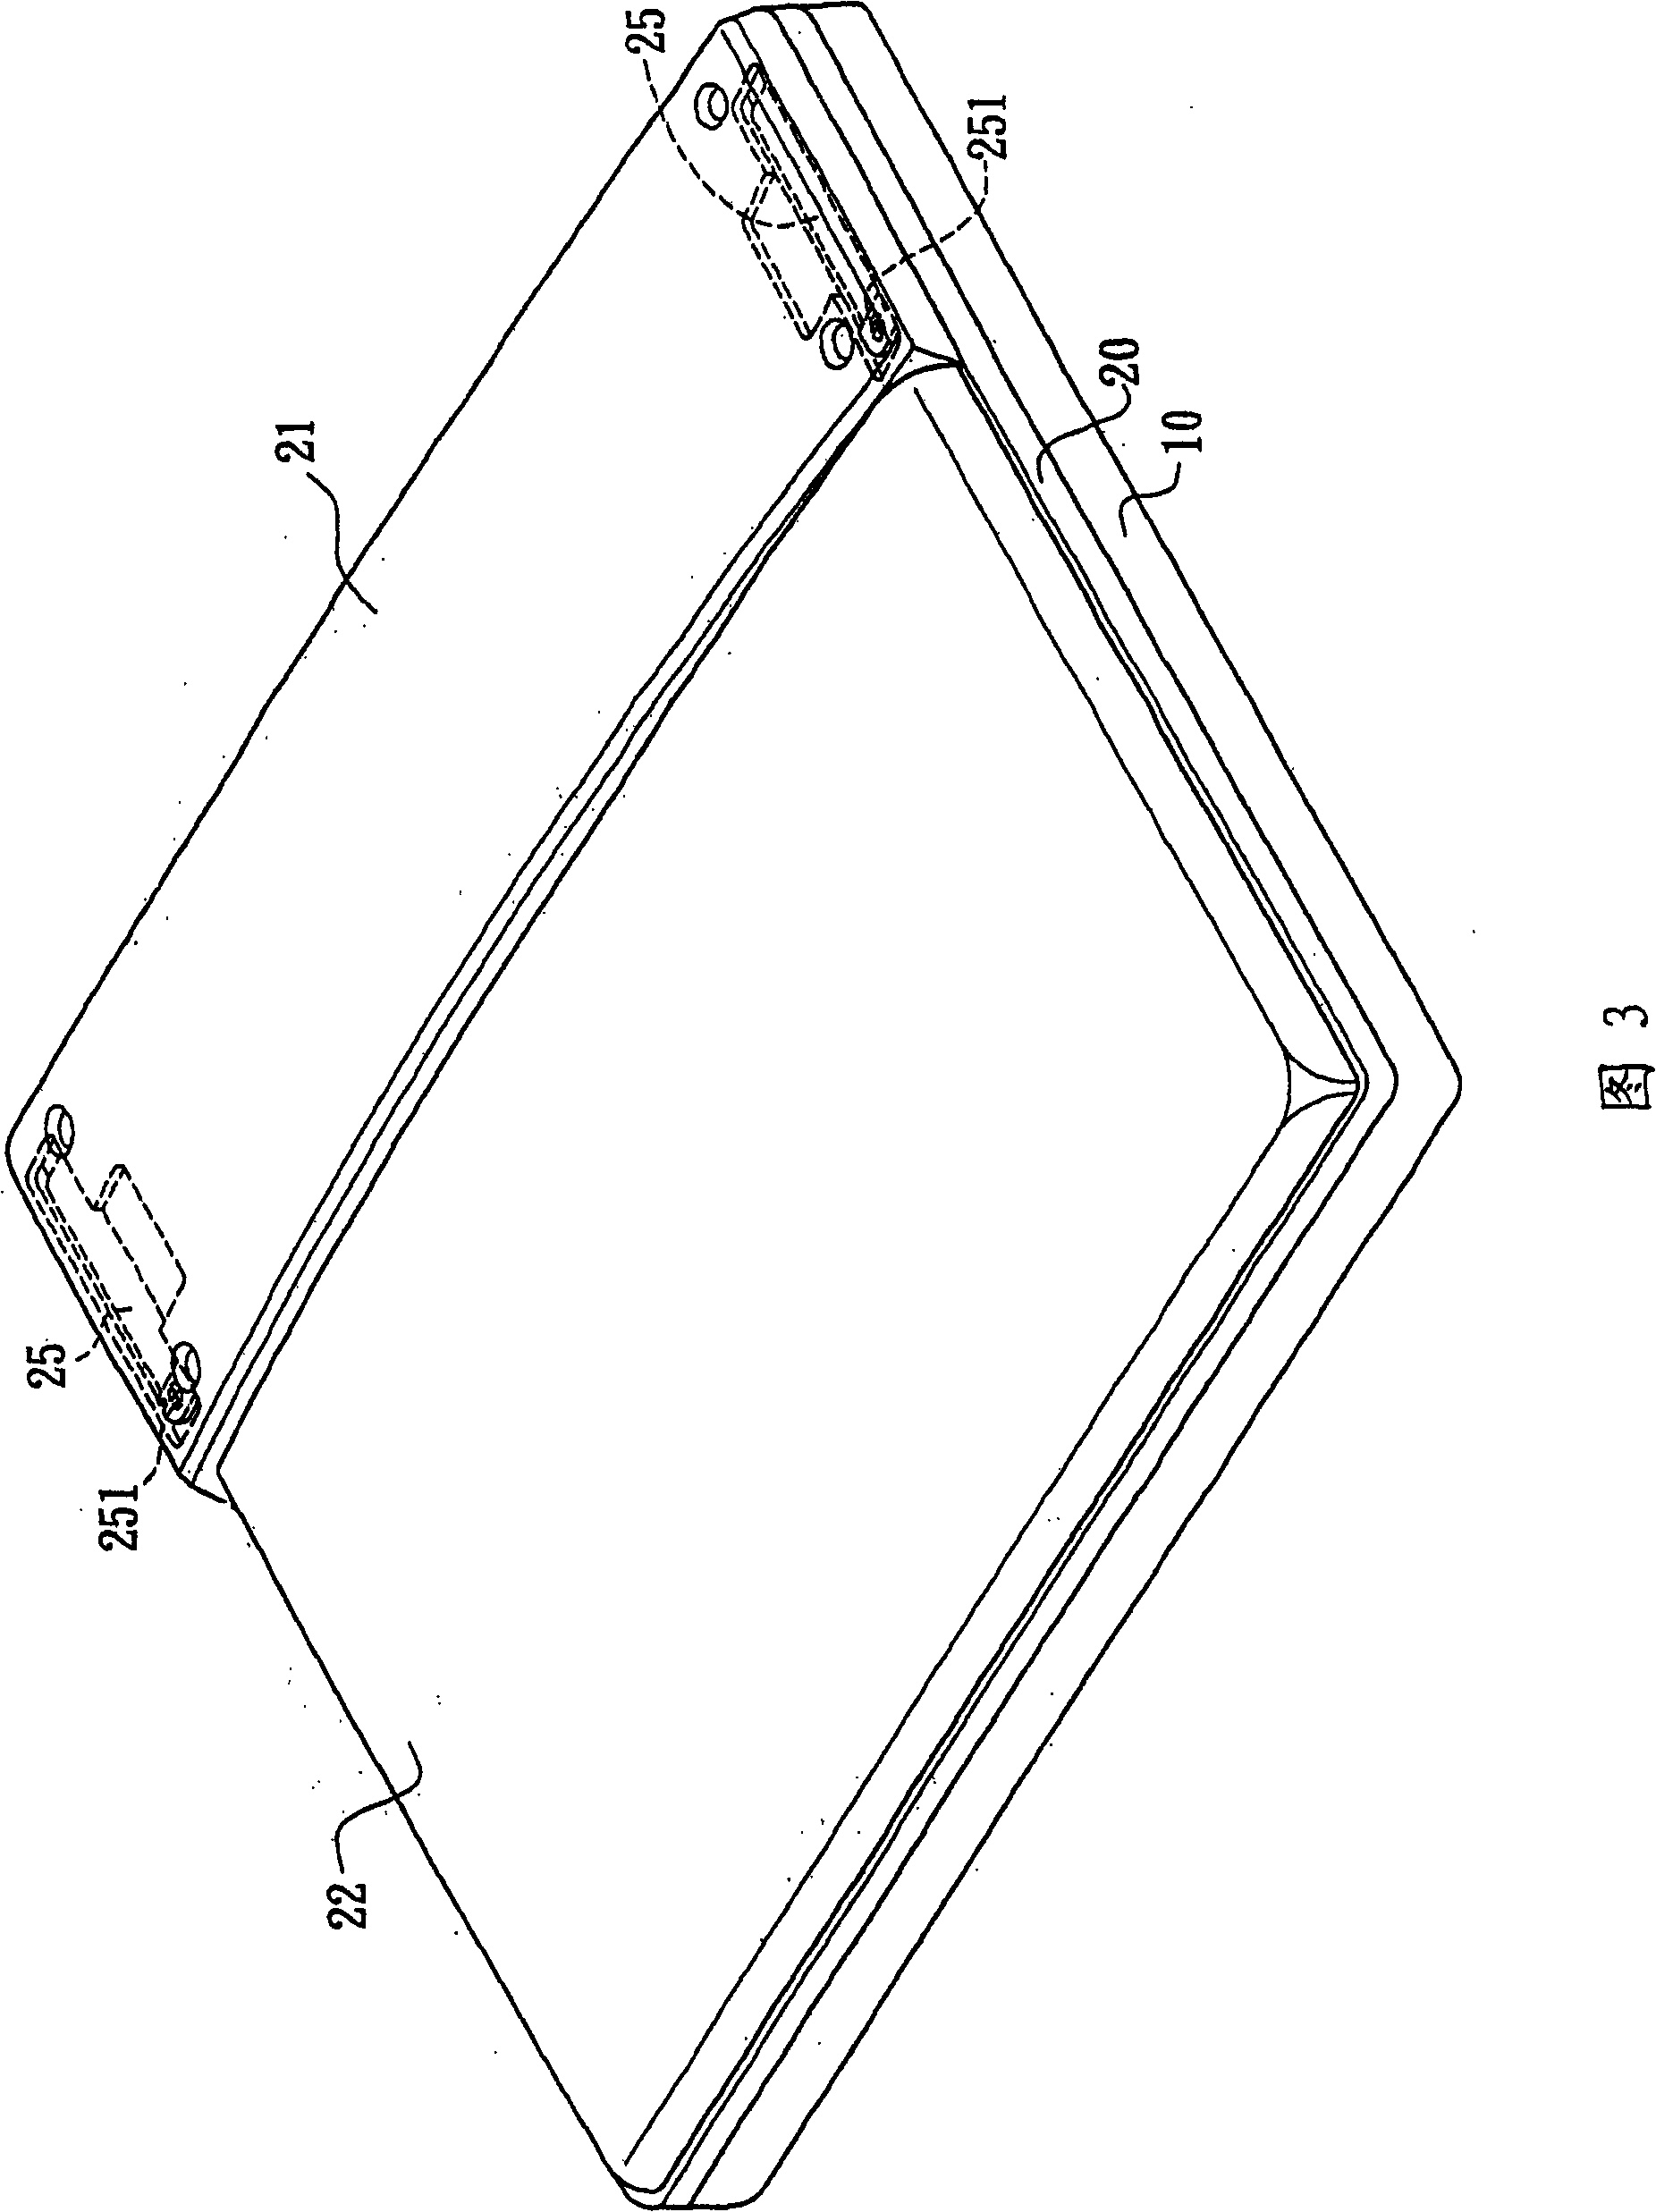 Electronic device capable of changing panel of case